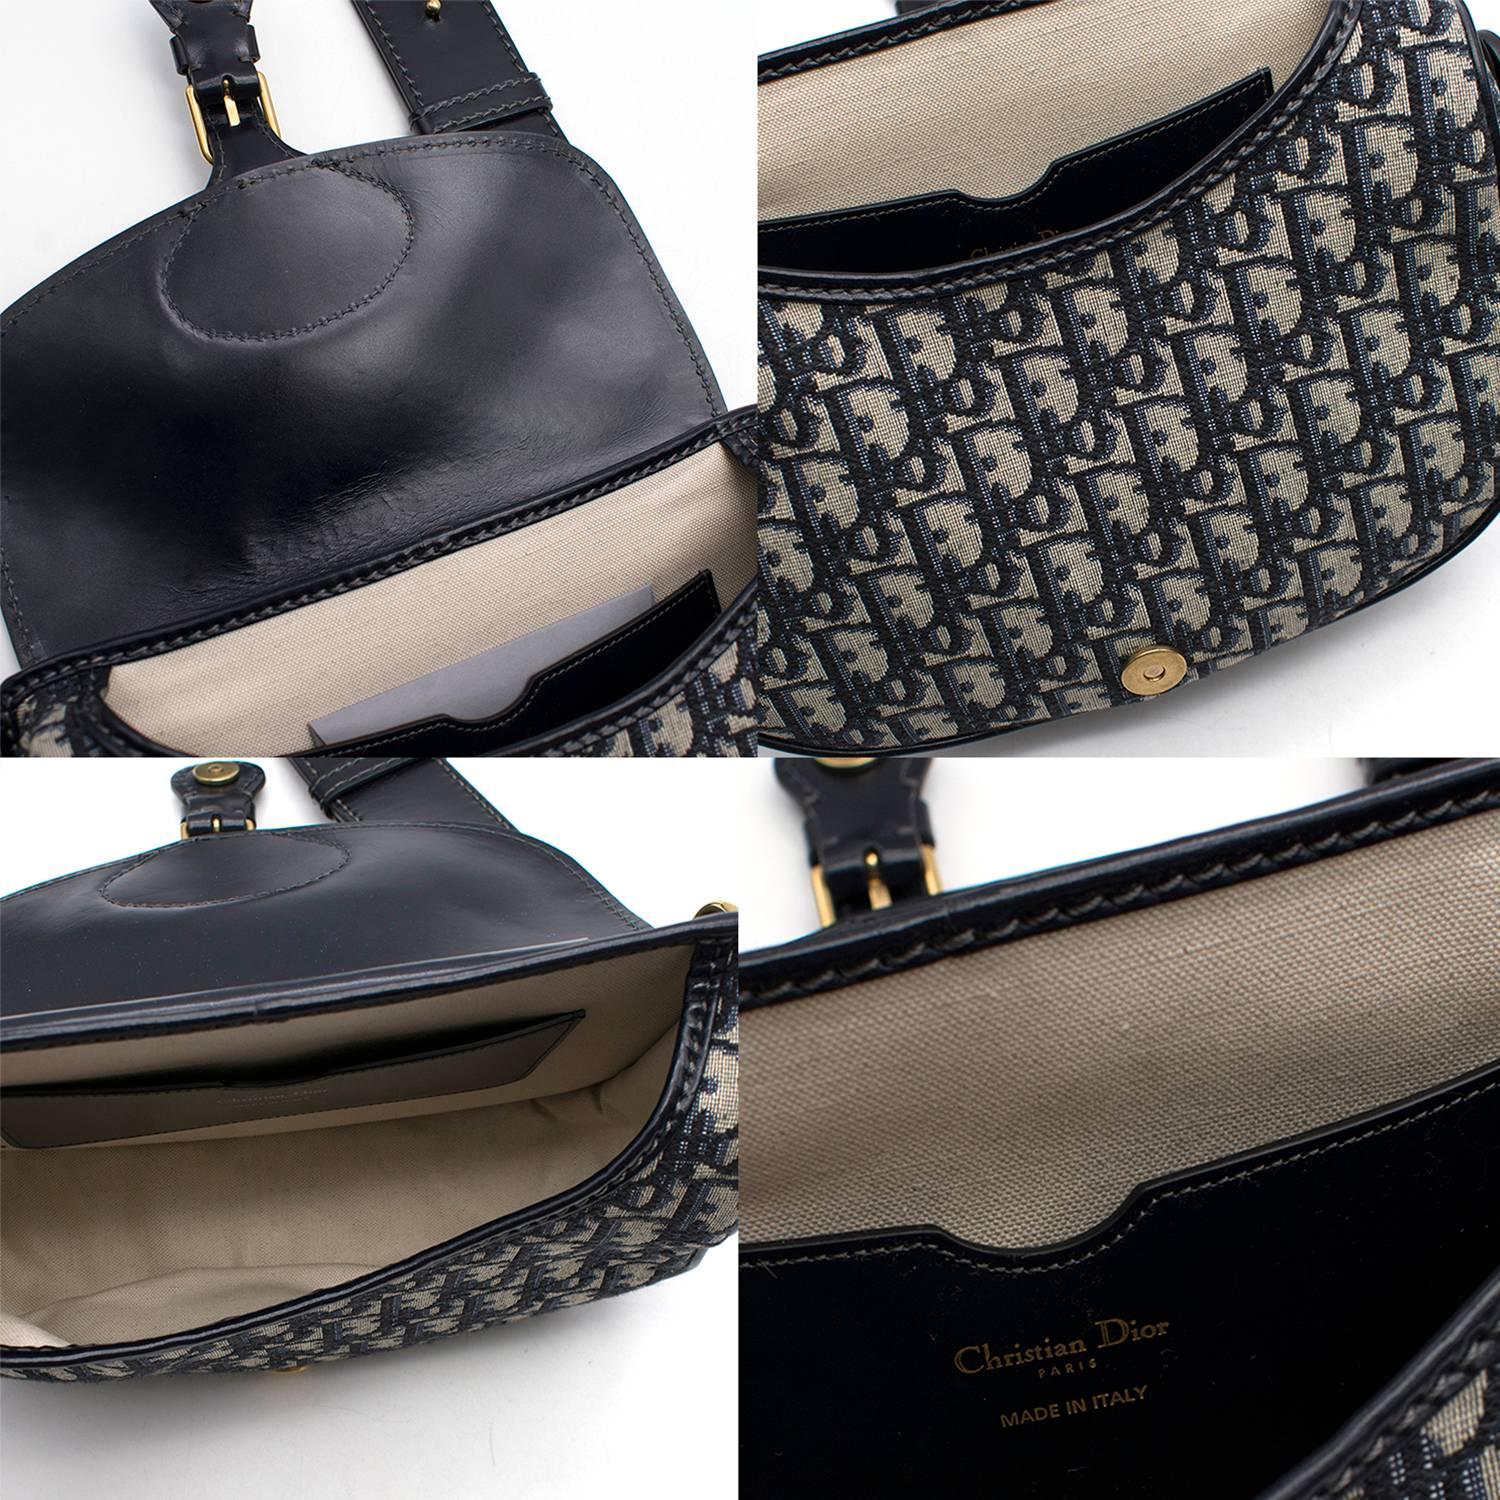  Dior Monogram Canvas and Leather Bag For Sale 4